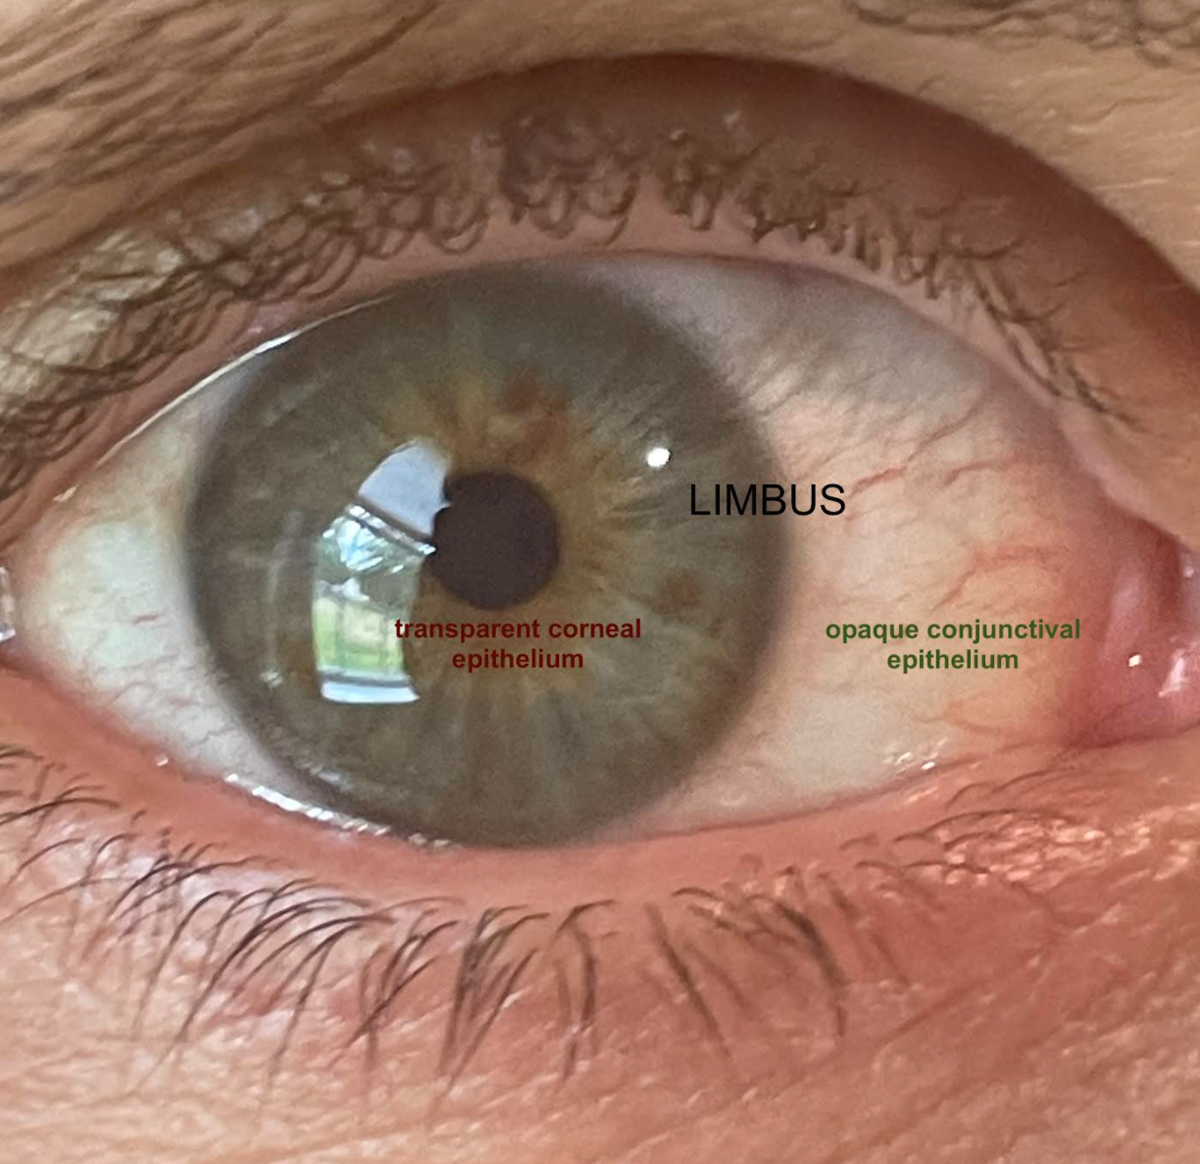 The limbus is the transition zone preventing the opaque epithelium from invading the clear cornea.